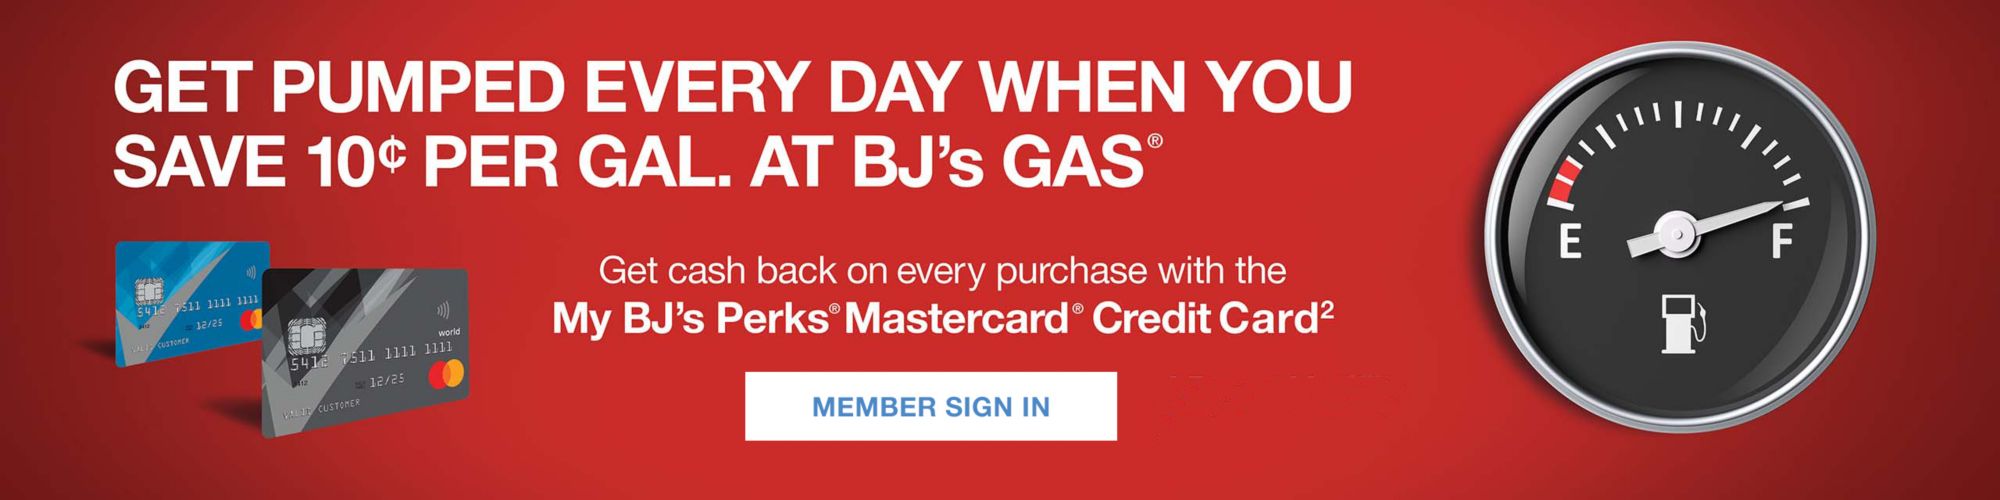 Get pumped every day when you save 10 cents per gallon at BJ's Gas. Click for member sign in.